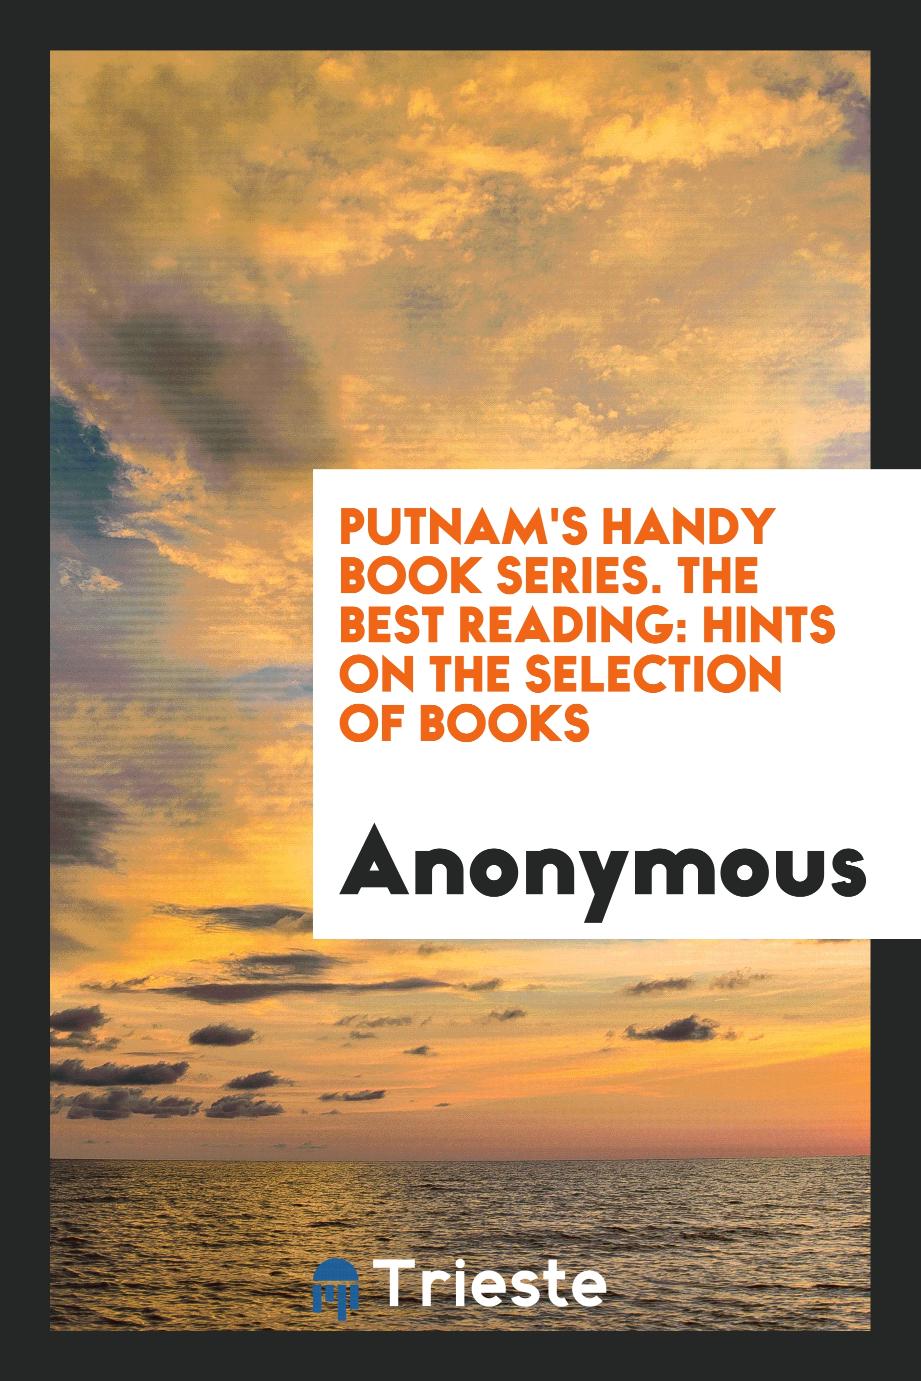 Putnam's Handy Book Series. The Best Reading: Hints on the Selection of Books